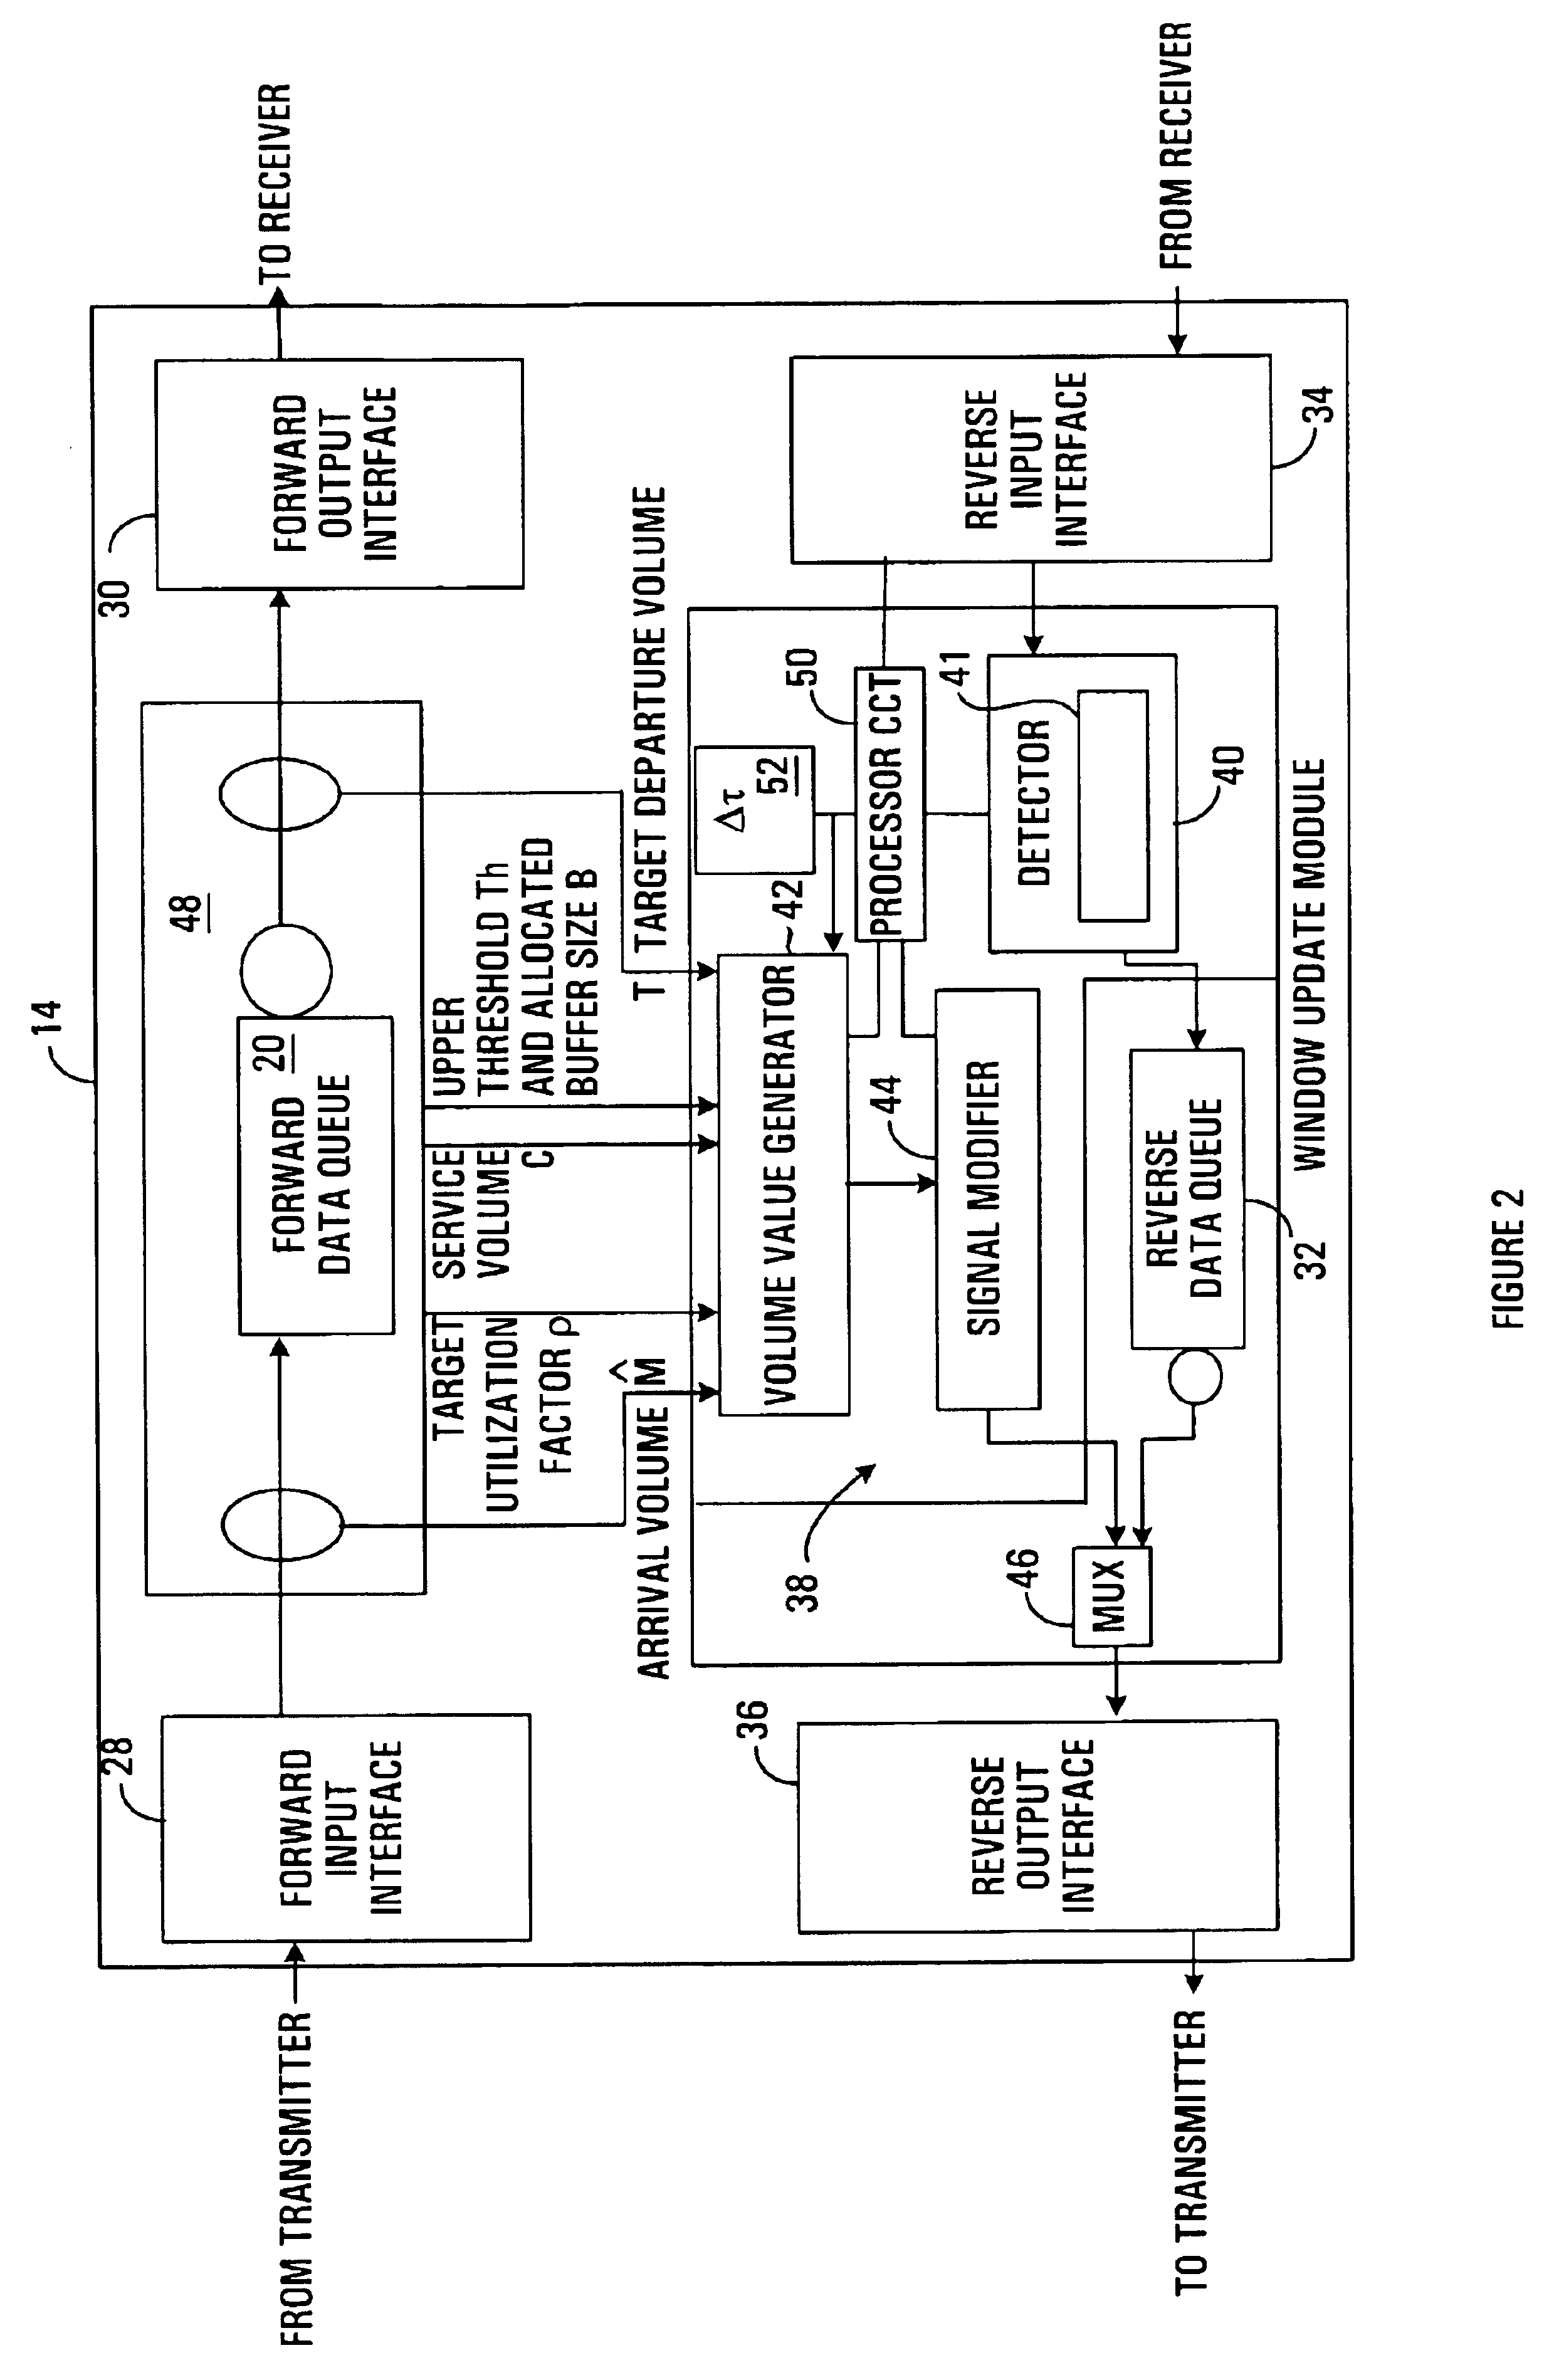 Method and apparatus for adjusting packet transmission volume from a source